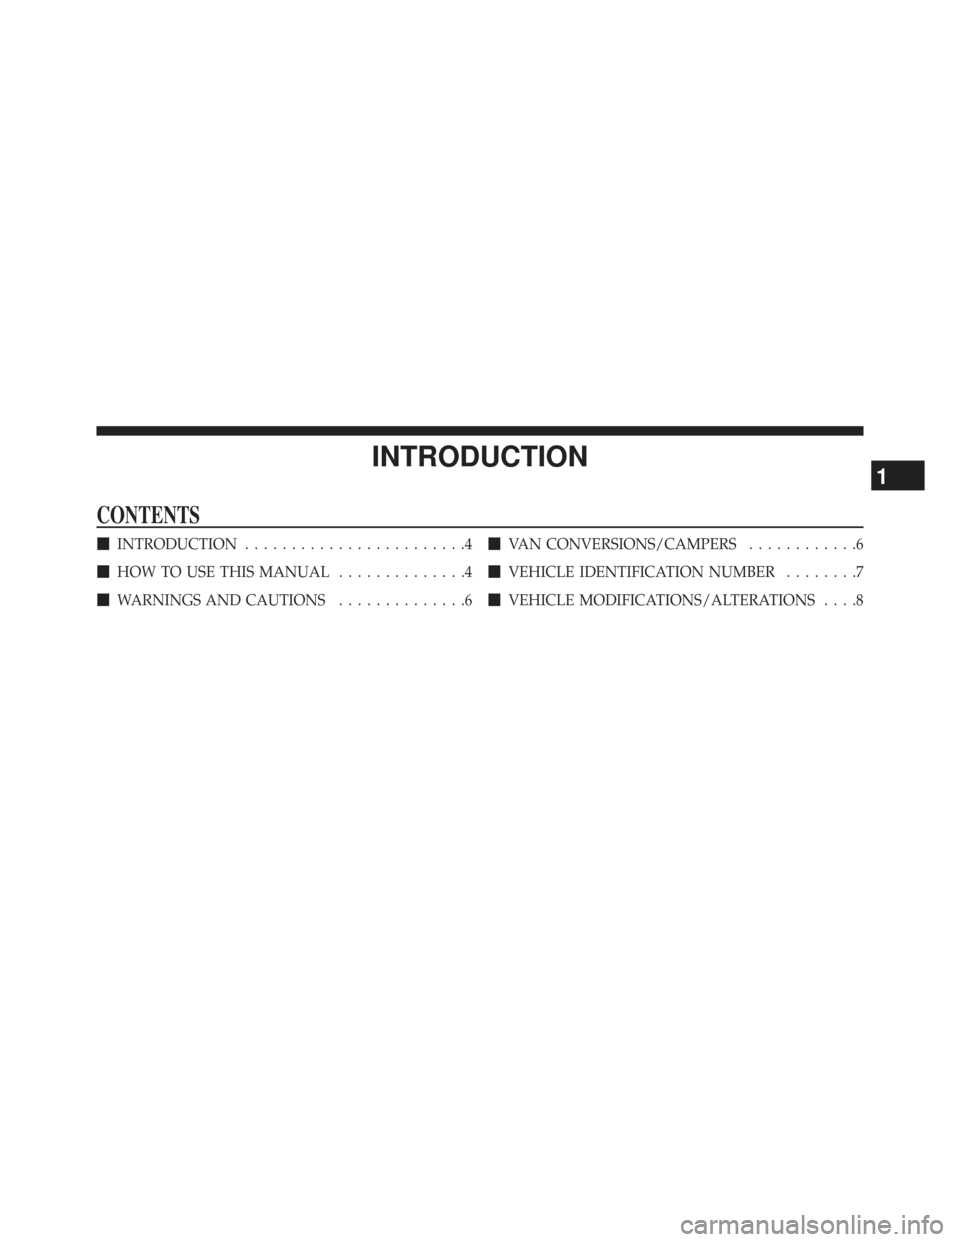 Ram C/V 2013  Owners Manual INTRODUCTION
CONTENTS
INTRODUCTION ........................4
 HOW TO USE THIS MANUAL ..............4
 WARNINGS AND CAUTIONS ..............6
VAN CONVERSIONS/CAMPERS ............6
 VEHICLE IDENTIFI